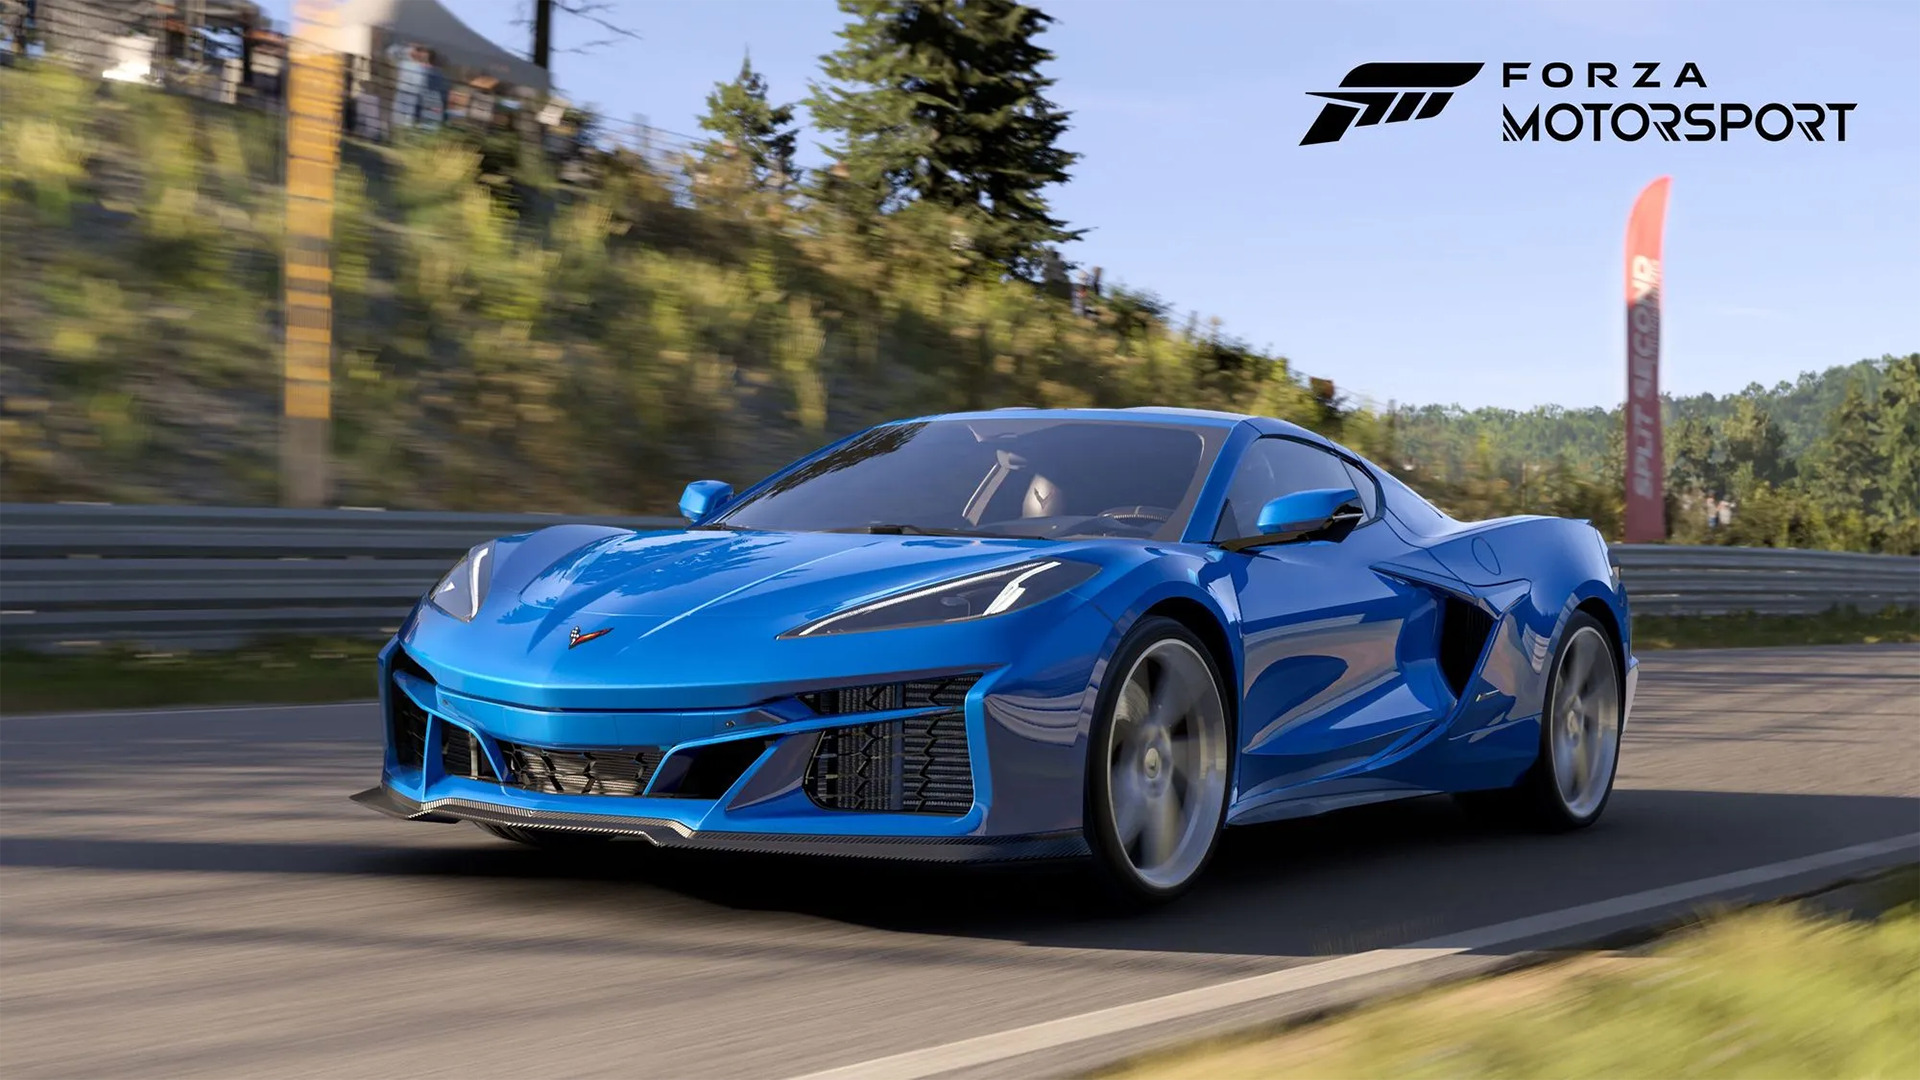 Forza Motorsport 7 September Update Now Available: New Drag Mode, Meetups,  and More – GTPlanet